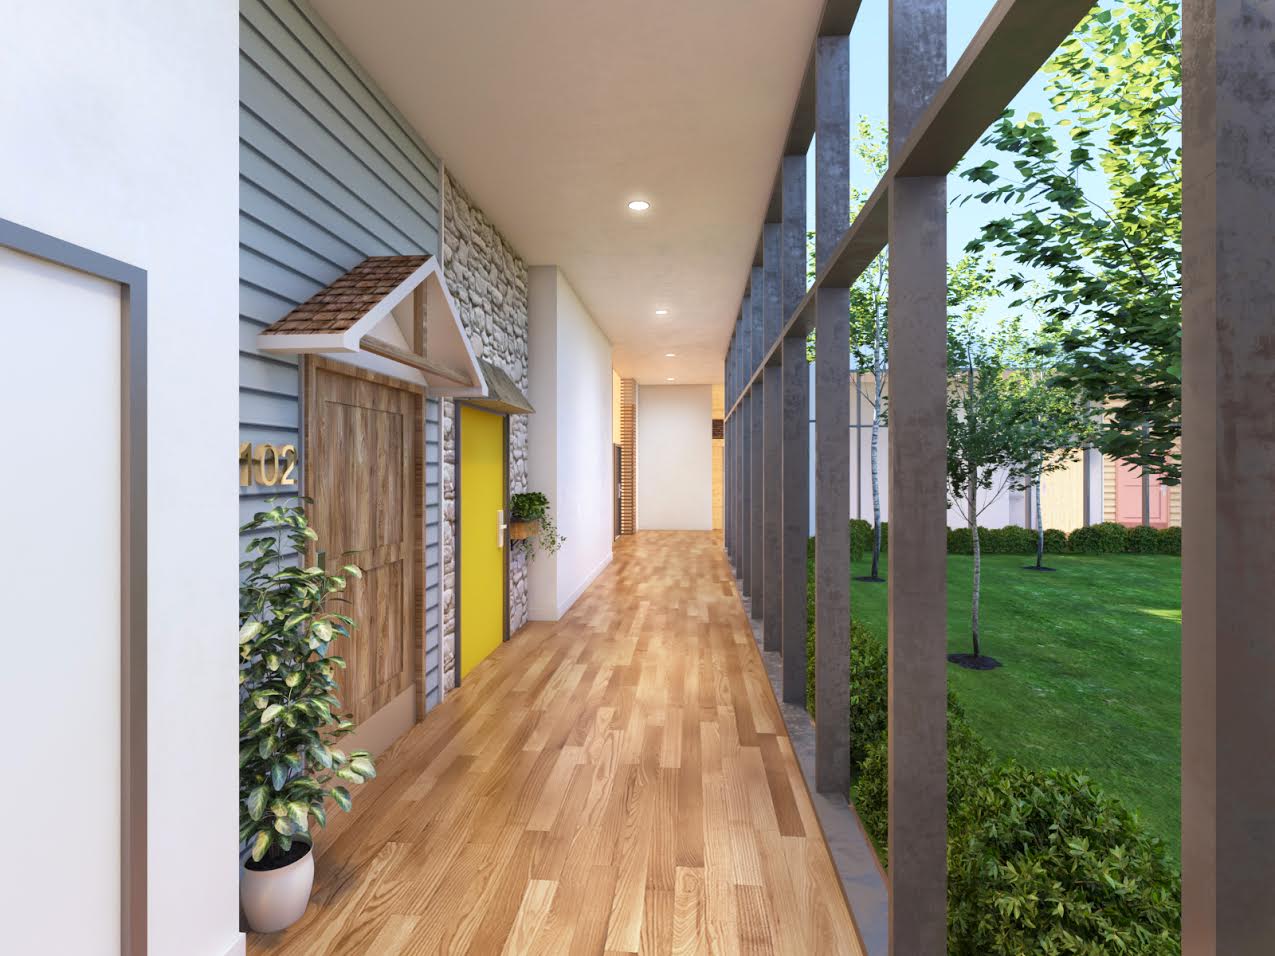 Hallway opening on a wide courtyard, in a dementia care community by van der King Design Group